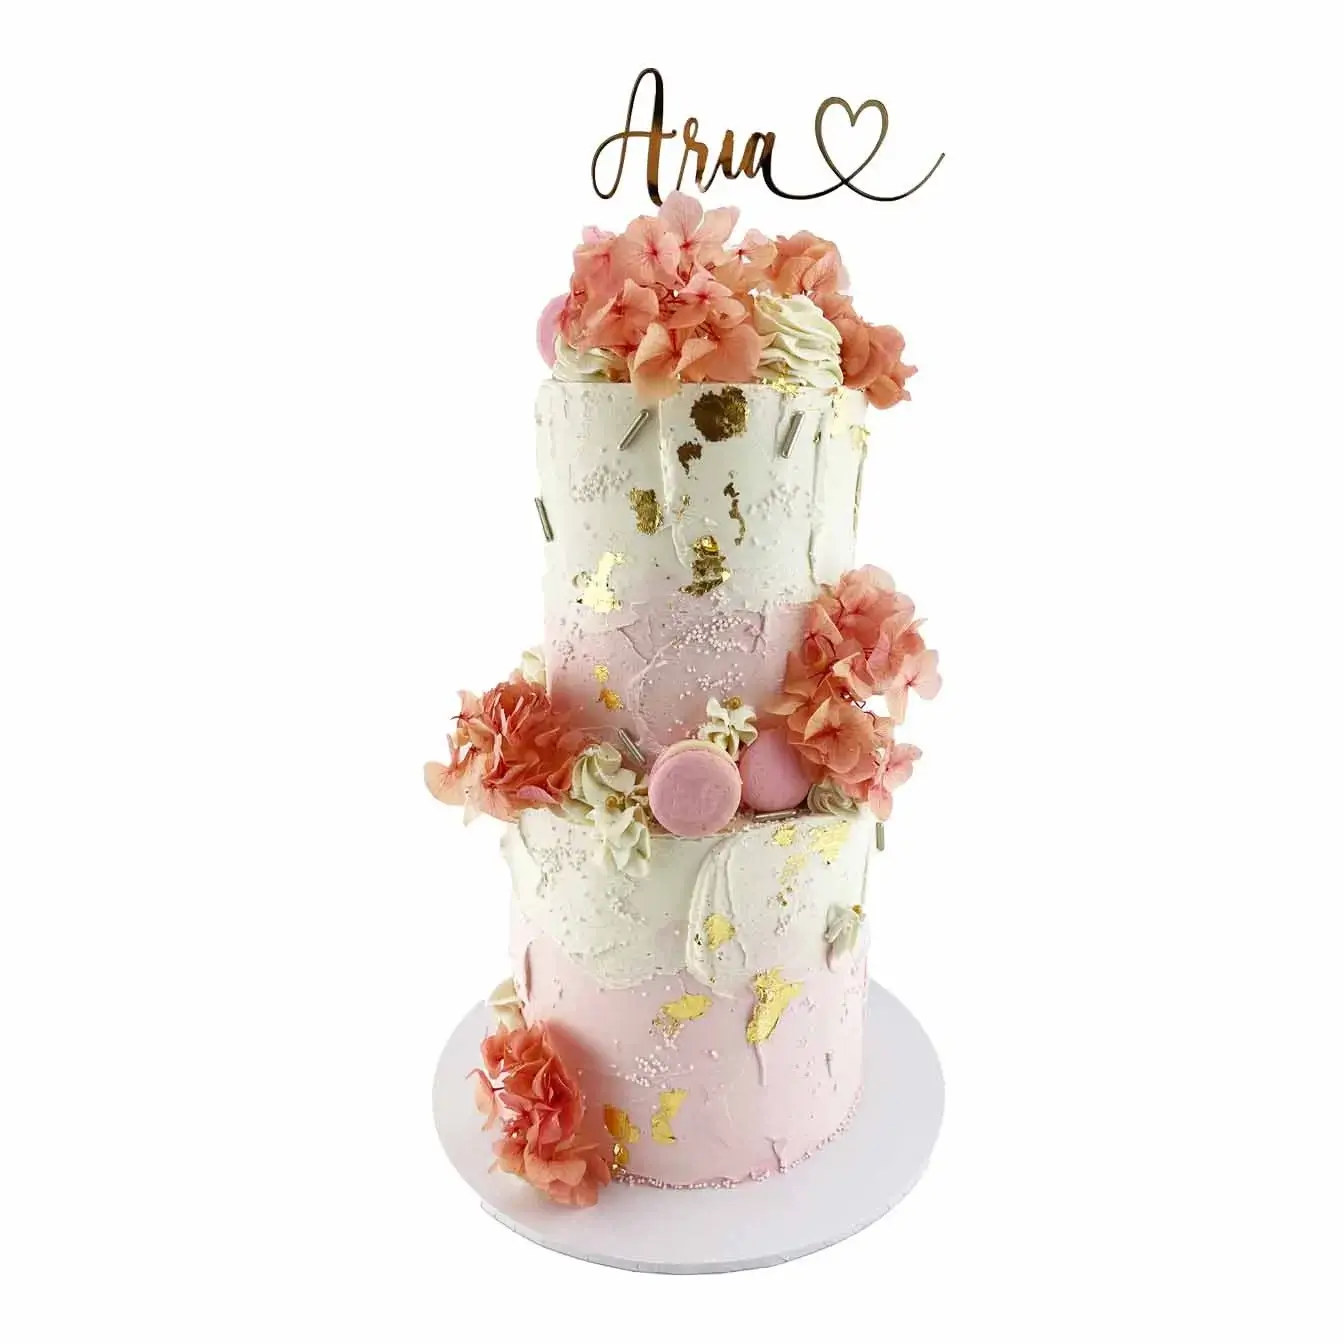 Beautiful pink and white watercolour cake with textured ganache frosting and delicate floral decorations